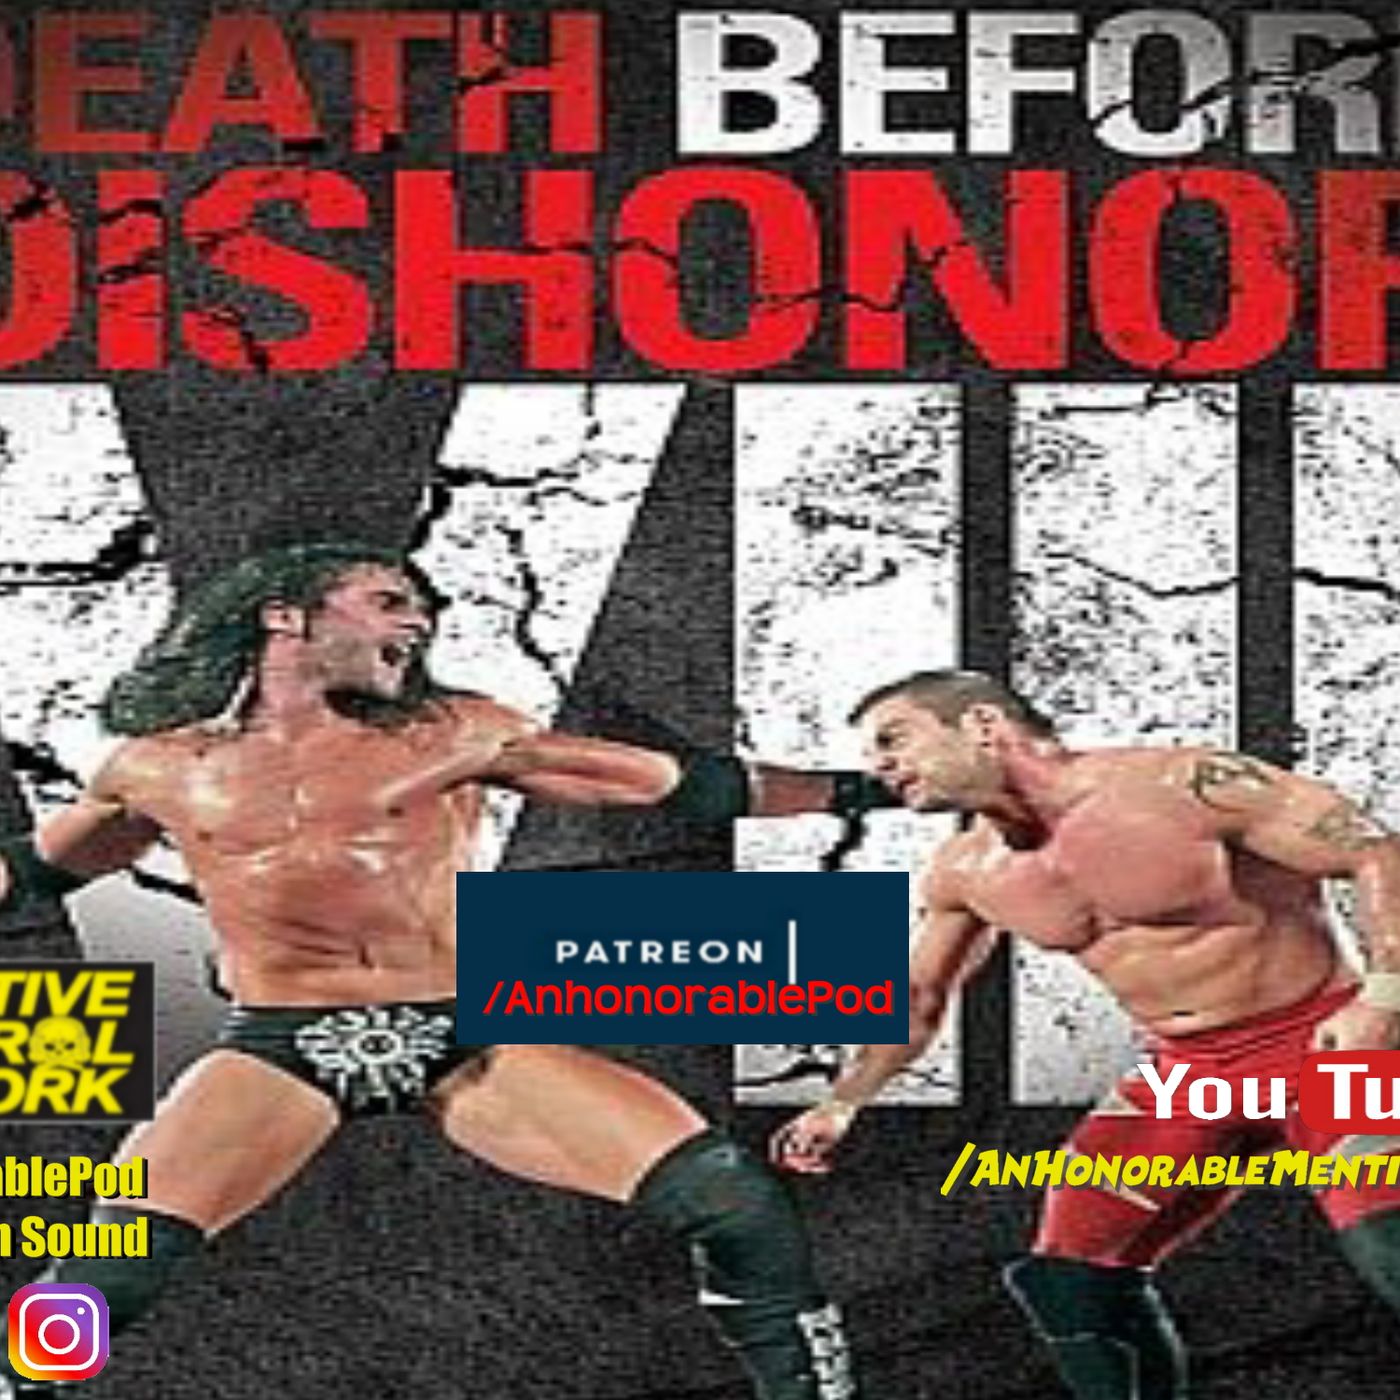 Episode 176: Death Before Dishonor 8 (Presented by Patreon.com/AnHonorablePod)